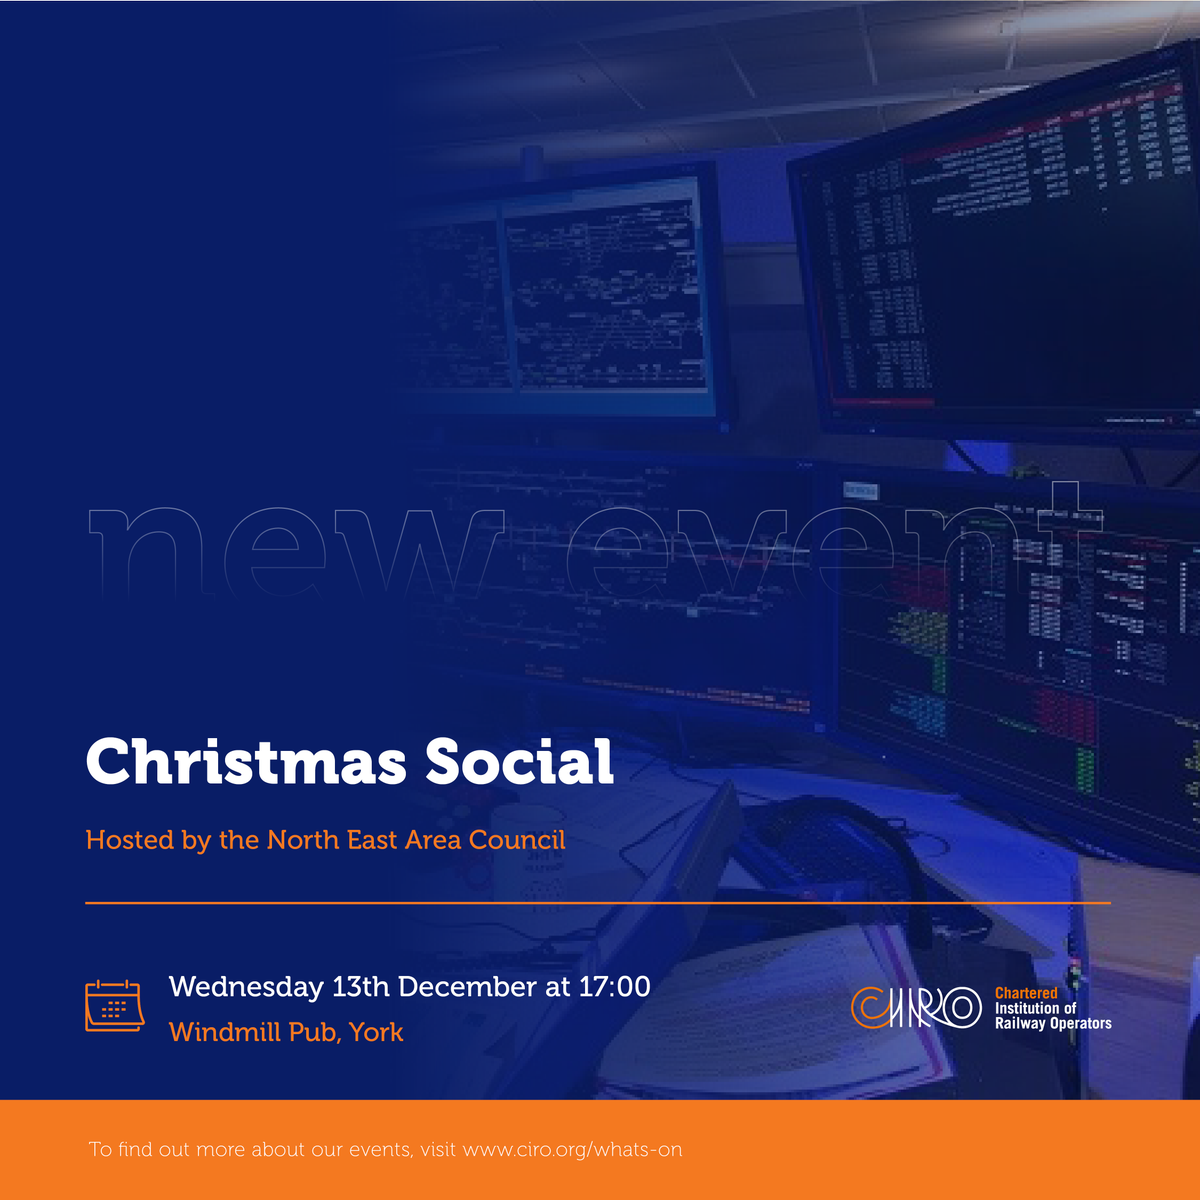 Come along and enjoy the festivities with fellow members as the Northeast Area Council host a Christmas Social at the Windmill Pub York on the 13th of December. Register today: ow.ly/BT8X50Qcn1i #railoperations #railevents #northeast